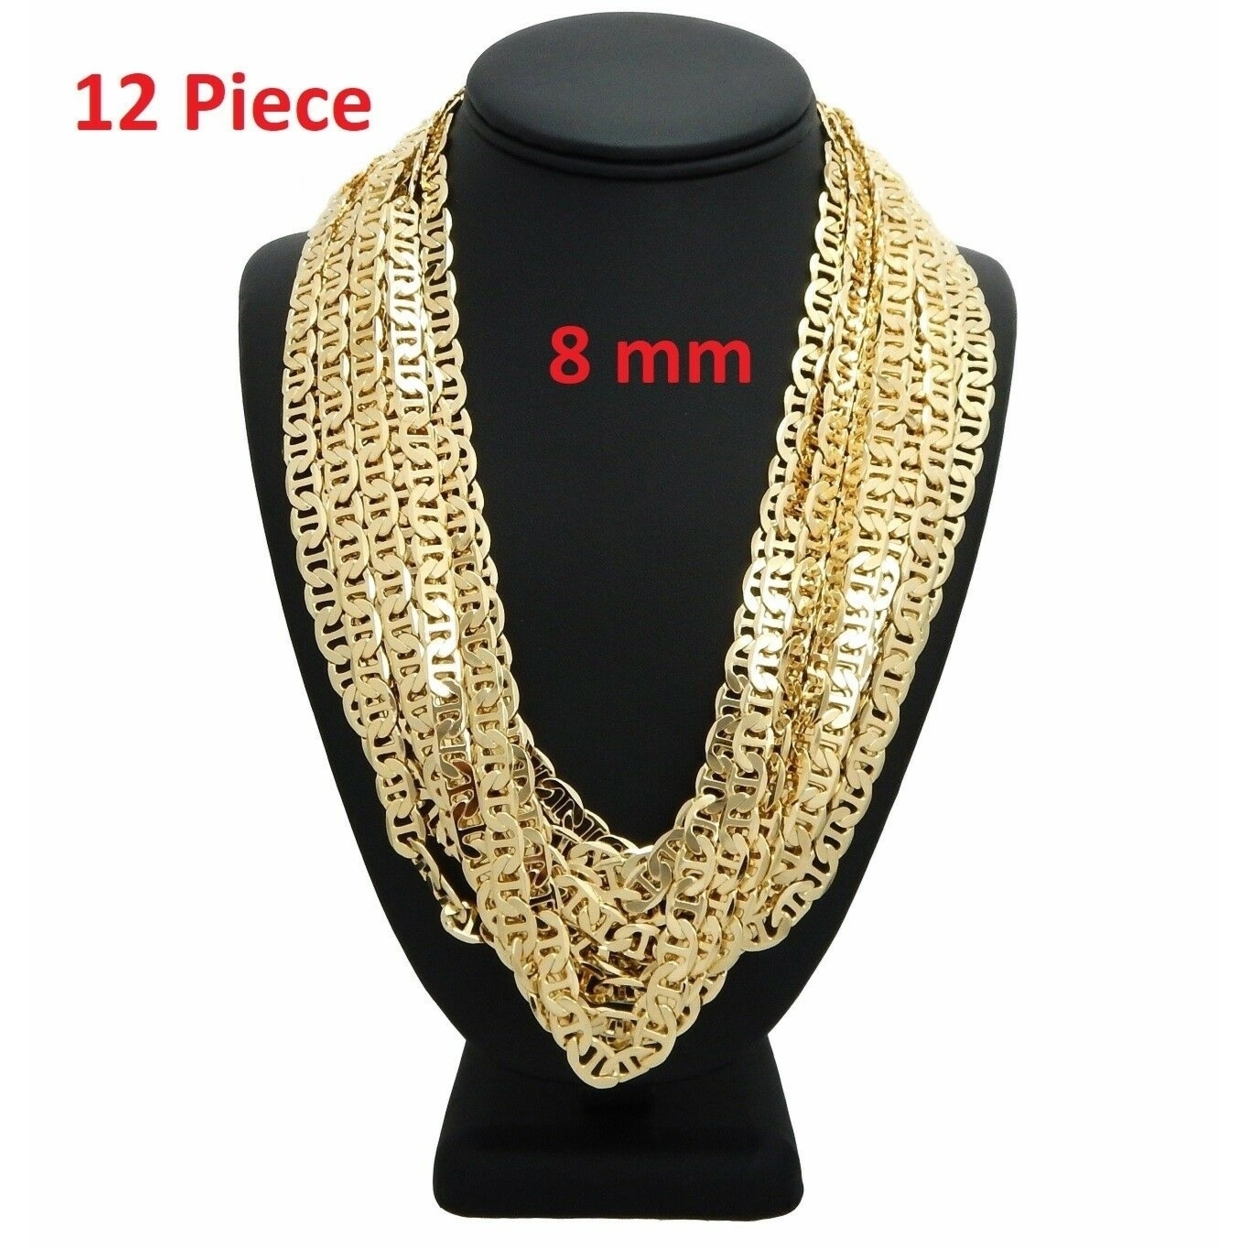 12 PCS. Mariner Anchor Chain Necklace 8mm 20 24 30 Gold Filled Finish Wholesale Lots - 8'